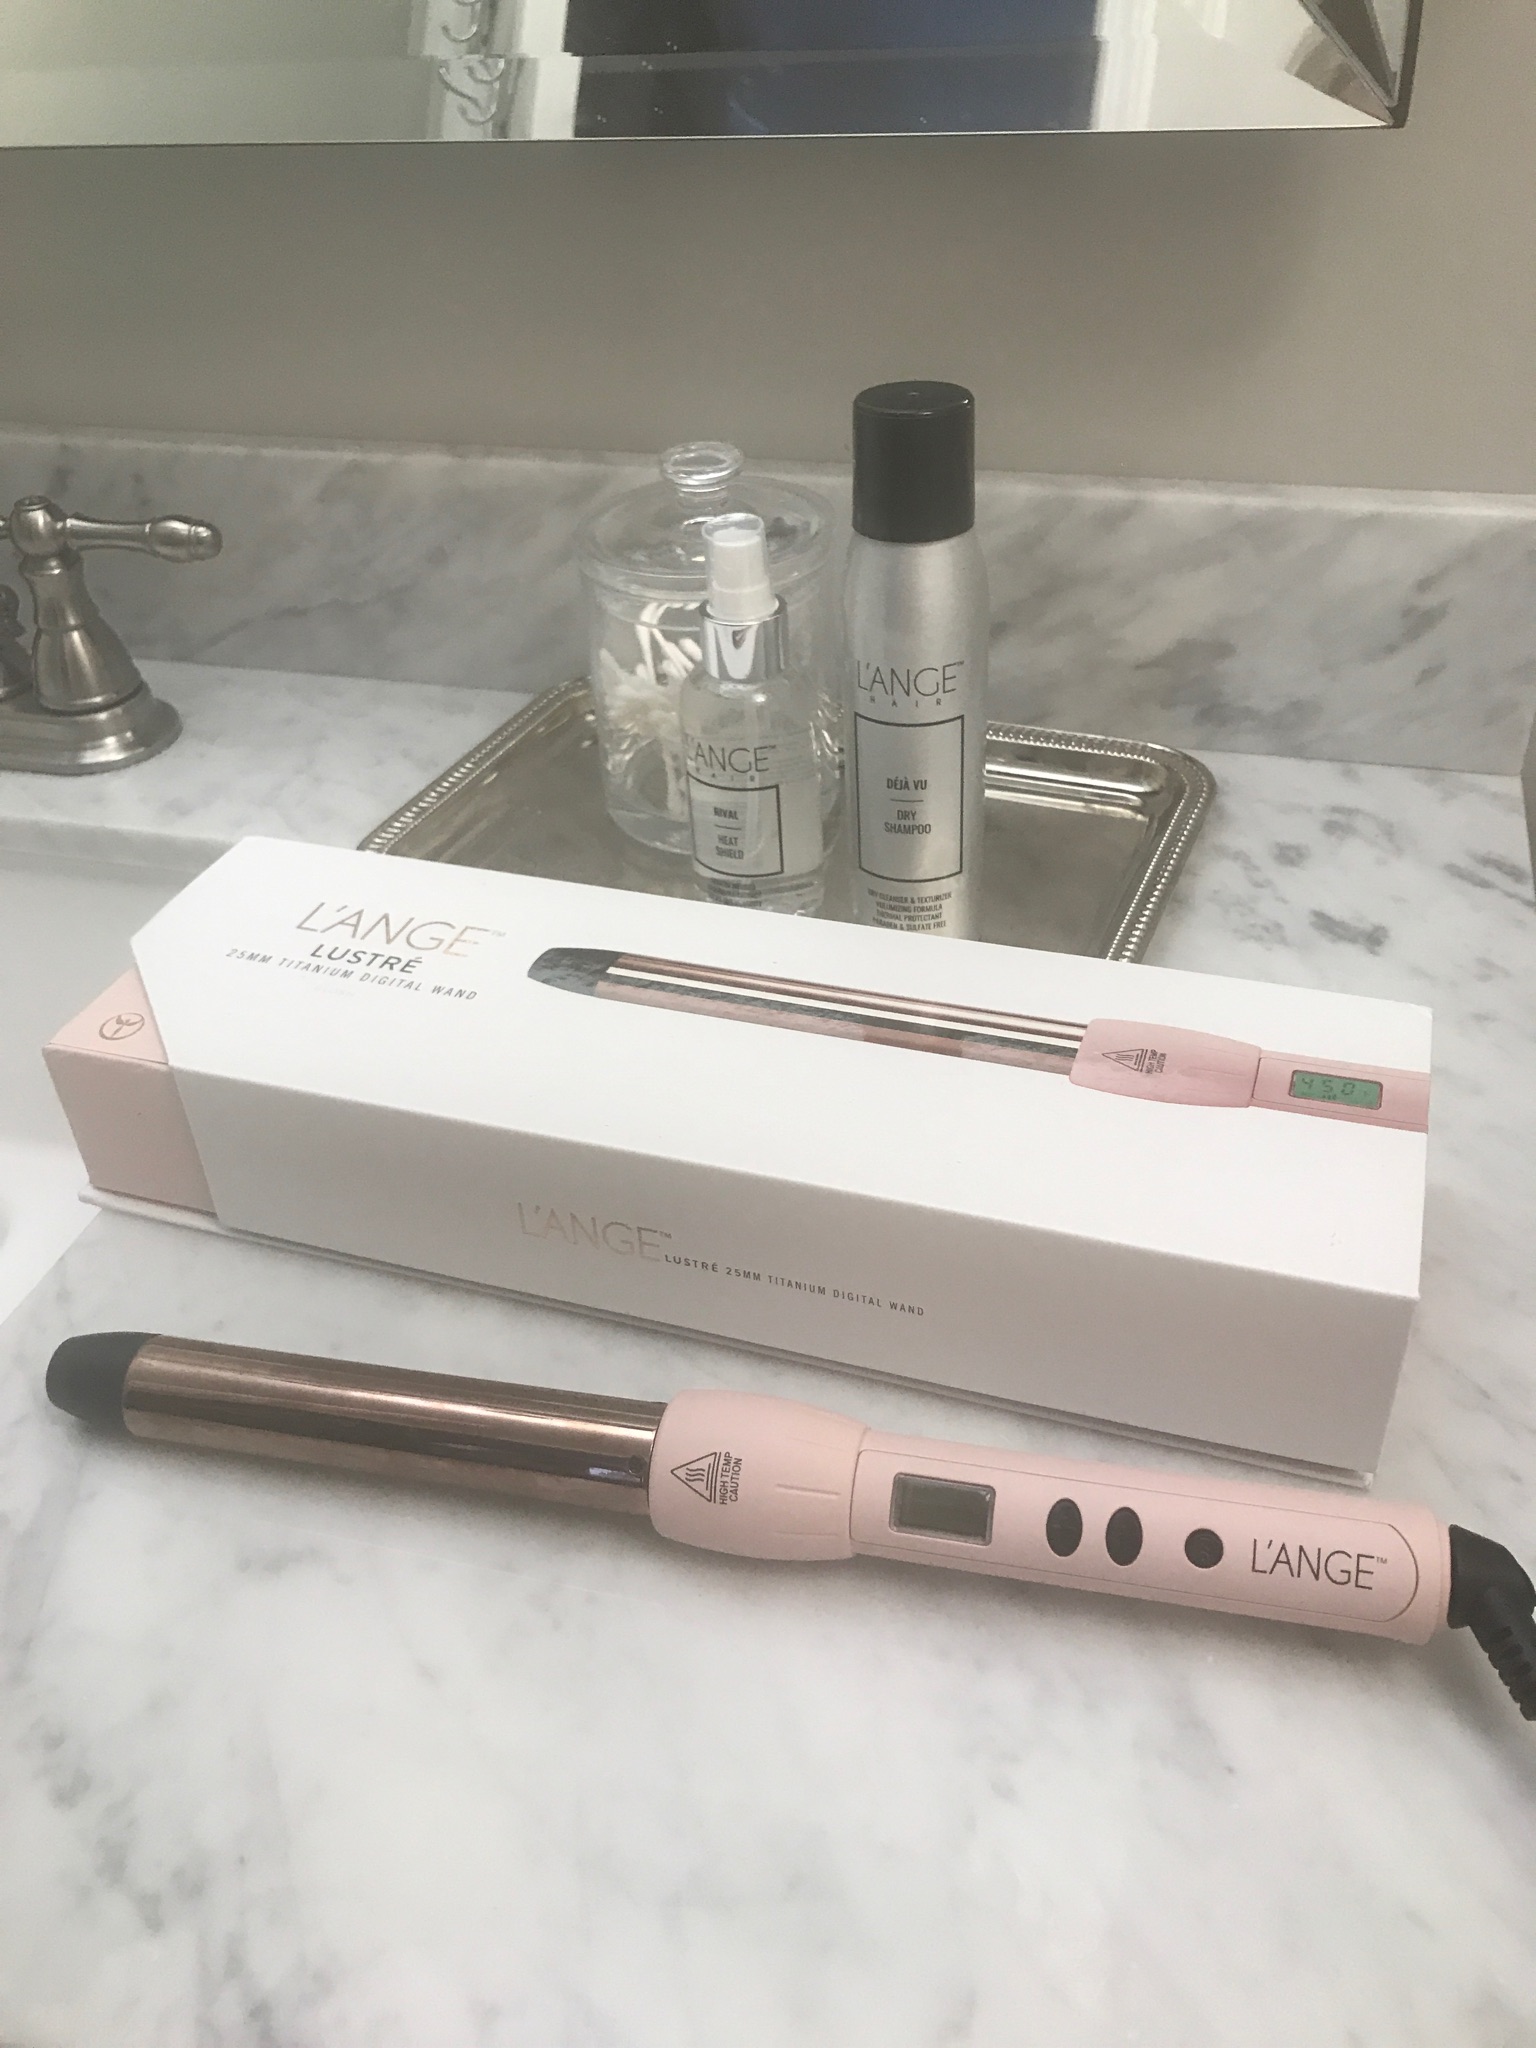 How to get long lasting curls with L'ange Curling Wand - A Cup Full of Sass